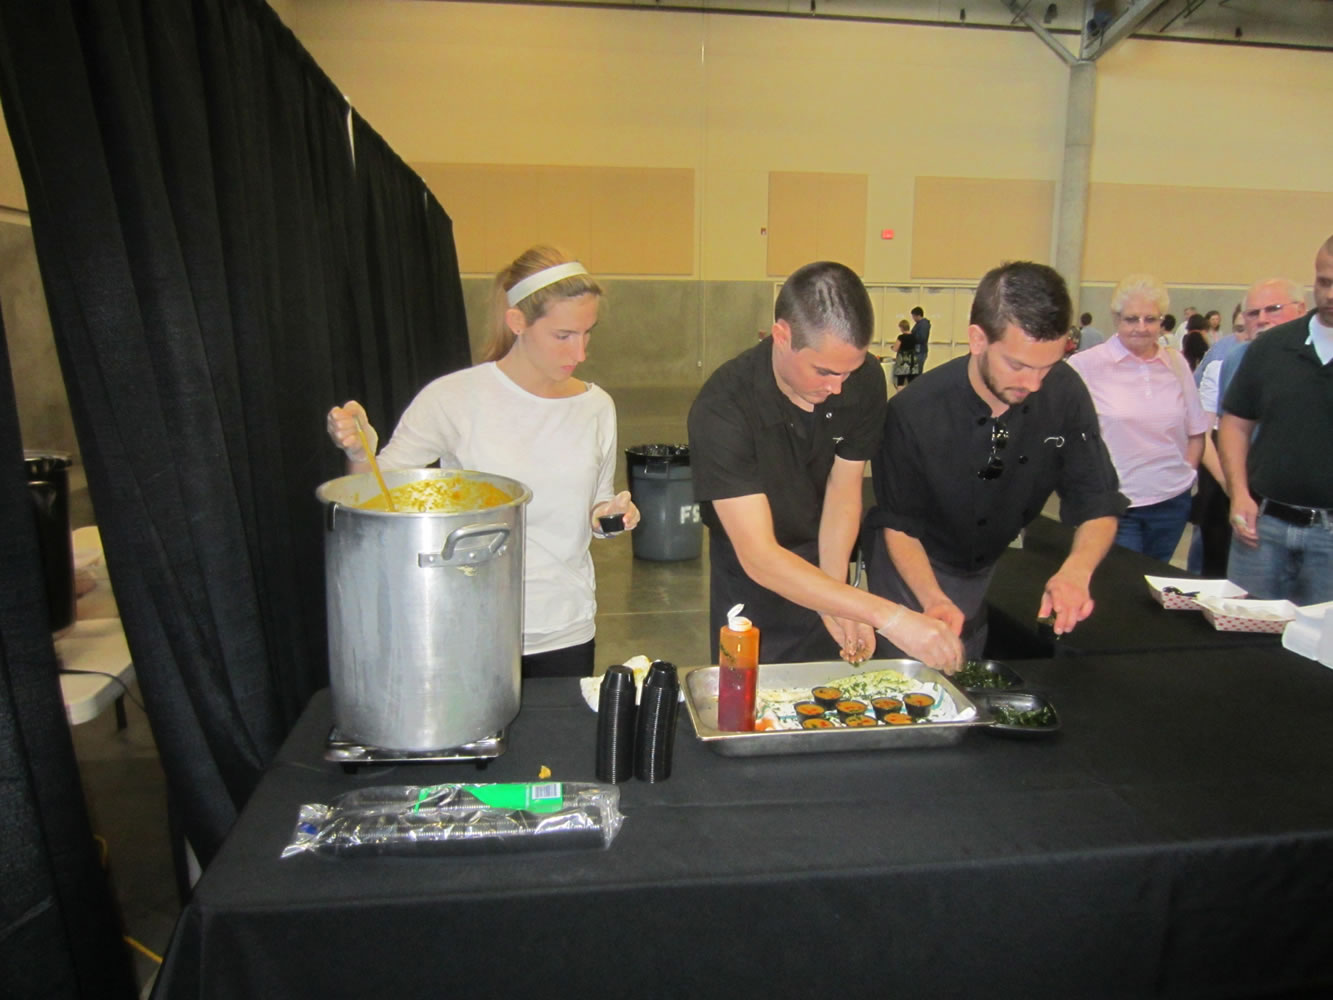 Ridgefield/Fairgrounds: Mark Wornson of Tommy O's restaurant, right, prepares samples of his award-winning roasted chicken and butternut squash soup at the 12th annual Share-A-Bowl fundraiser.